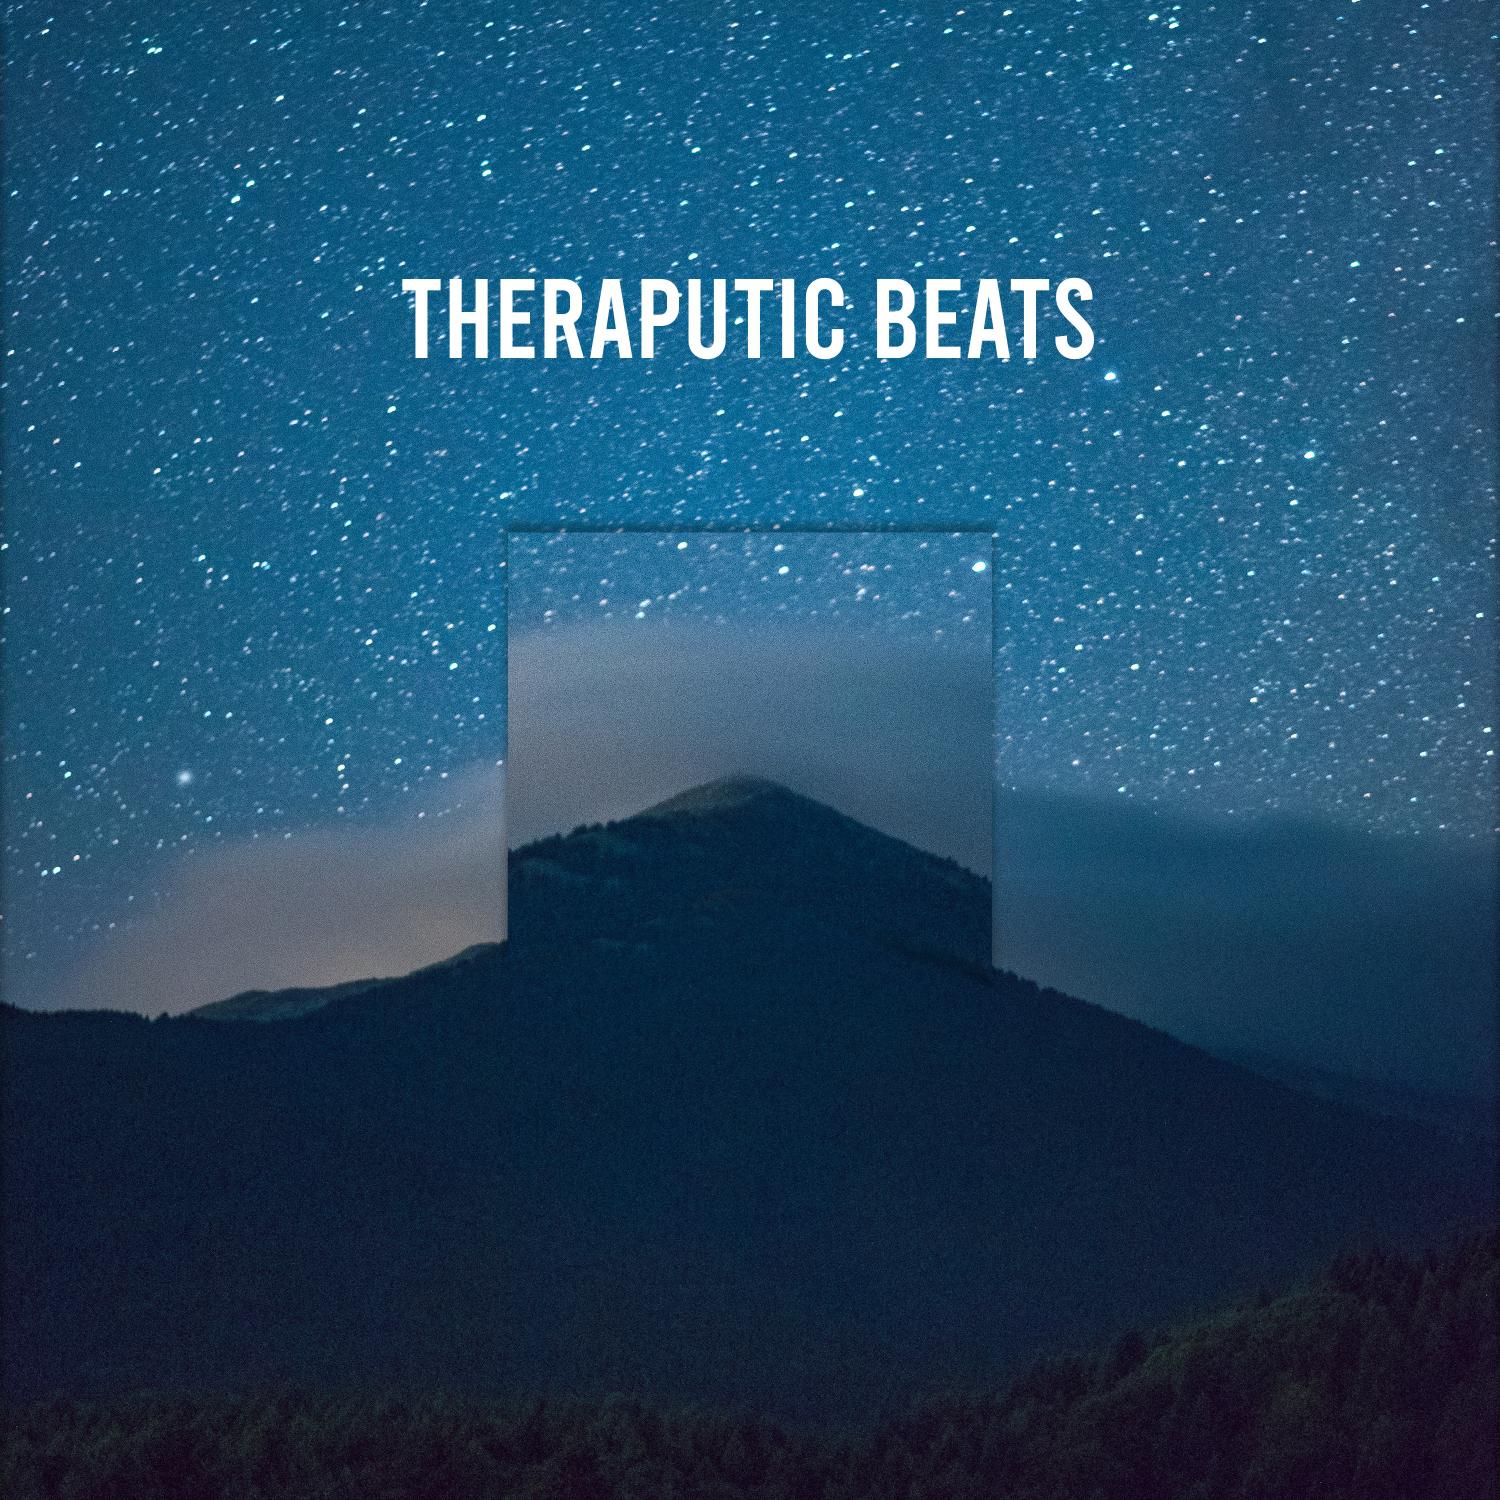 15 Therapeutic Beats for Concentration